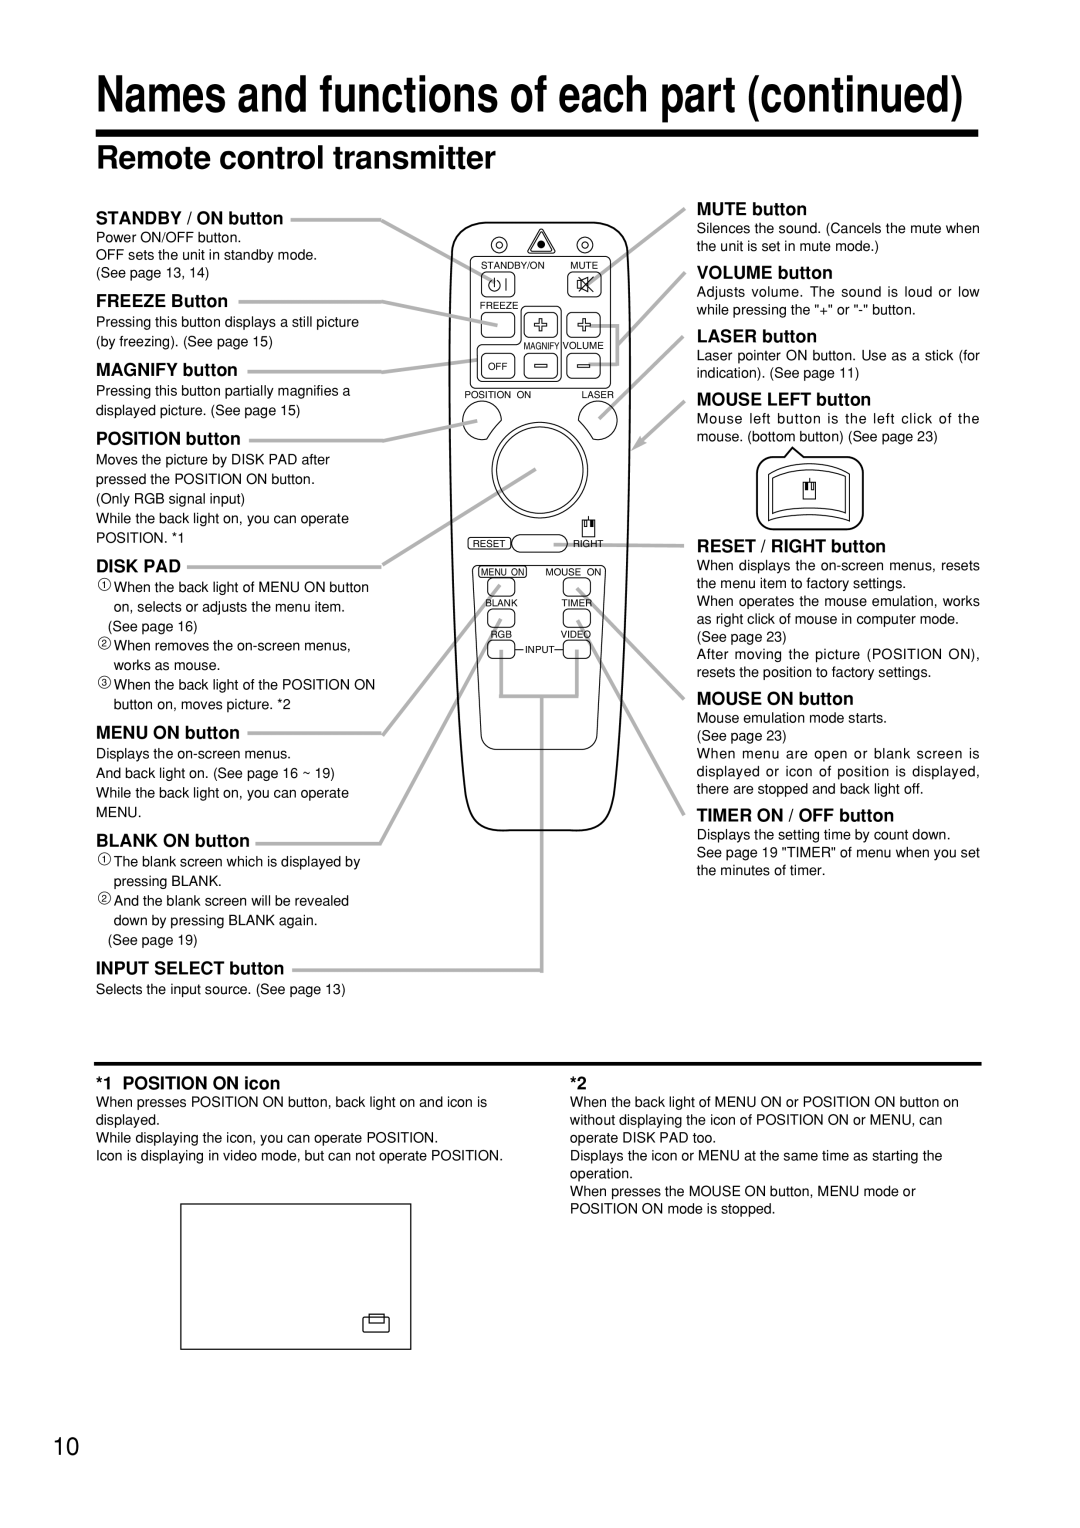 Hitachi CP-S845W specifications Remote control transmitter, Names and functions of each part continued 